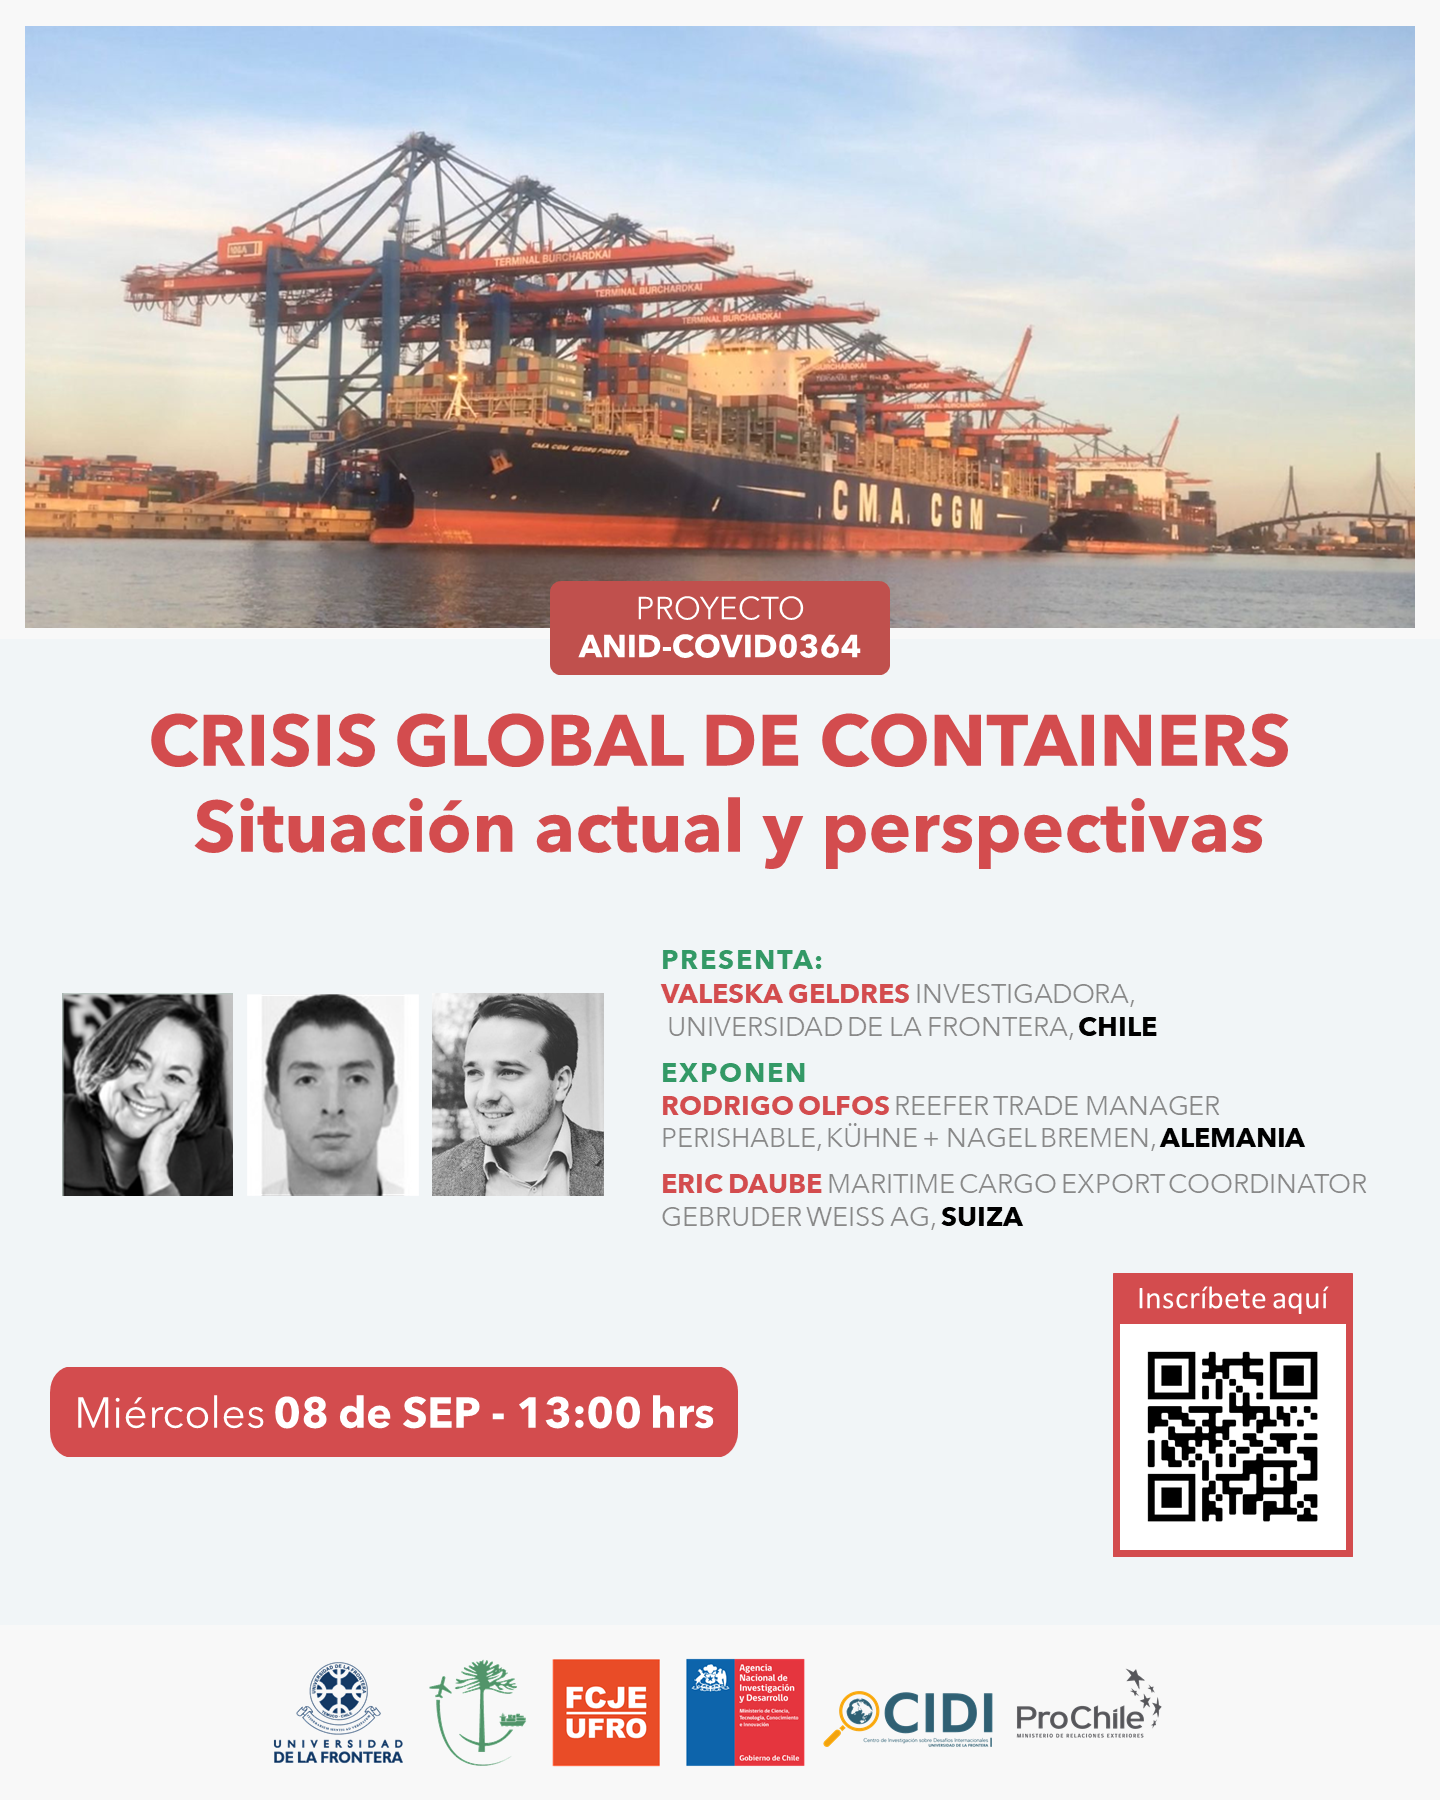 CRISIS GLOBAL CONTAINERS 8sep21